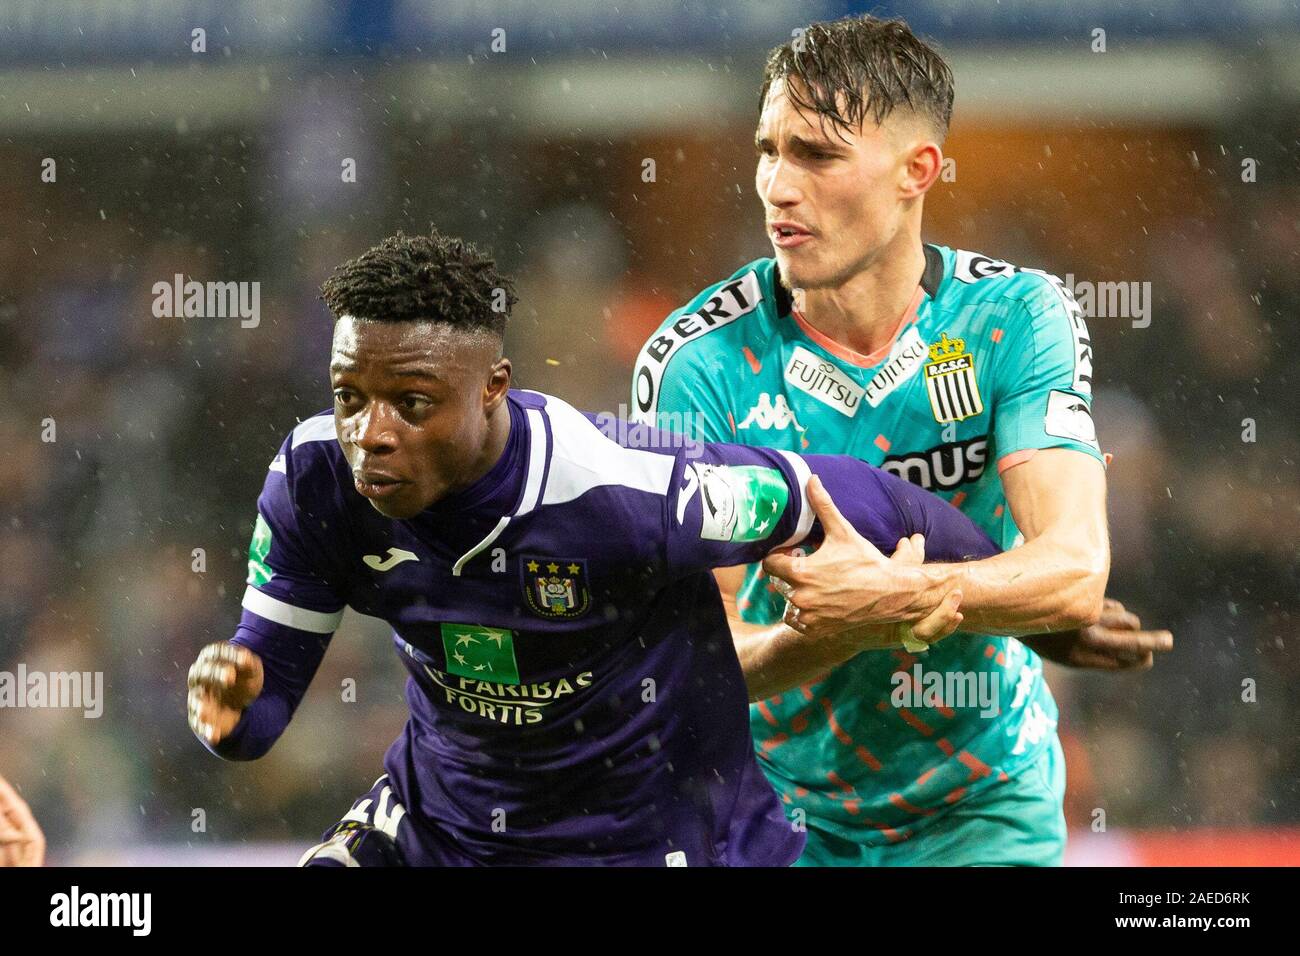 BRUSSELS, BELGIUM - December 08: Jeremy Doku of Anderlecht and Maxime Busi  of Charleroi fight for the ball during the Jupiler Pro League match day 18  between Rsc Anderlecht vs Sporting Charleroi